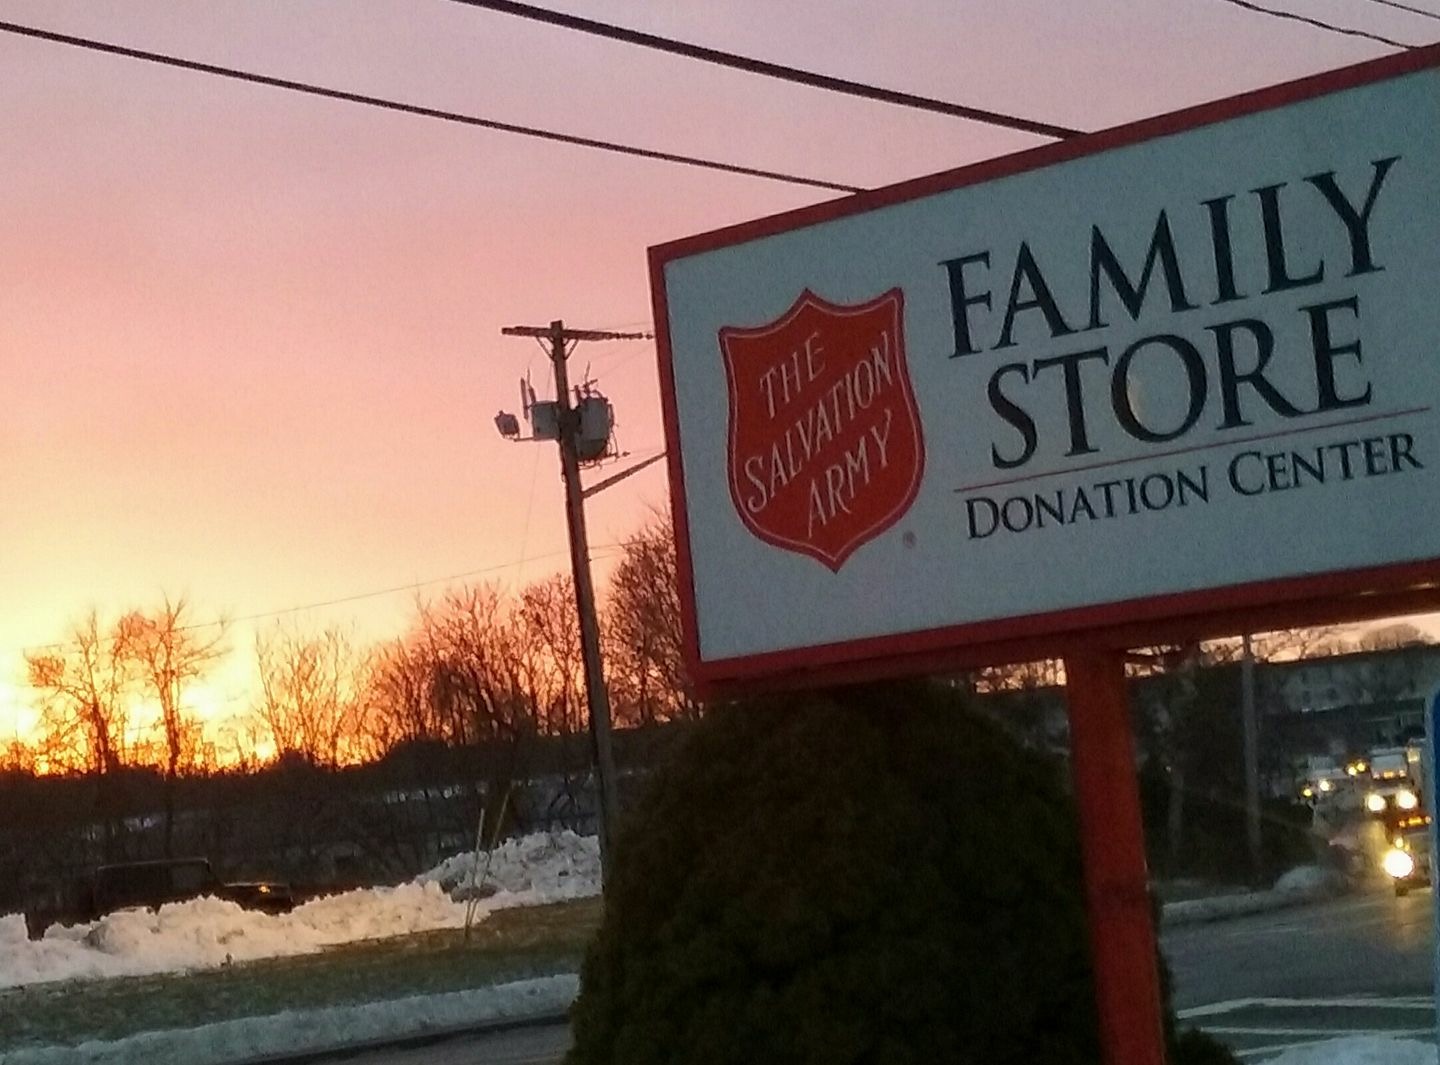 The Salvation Army Thrift Store West Yarmouth, MA